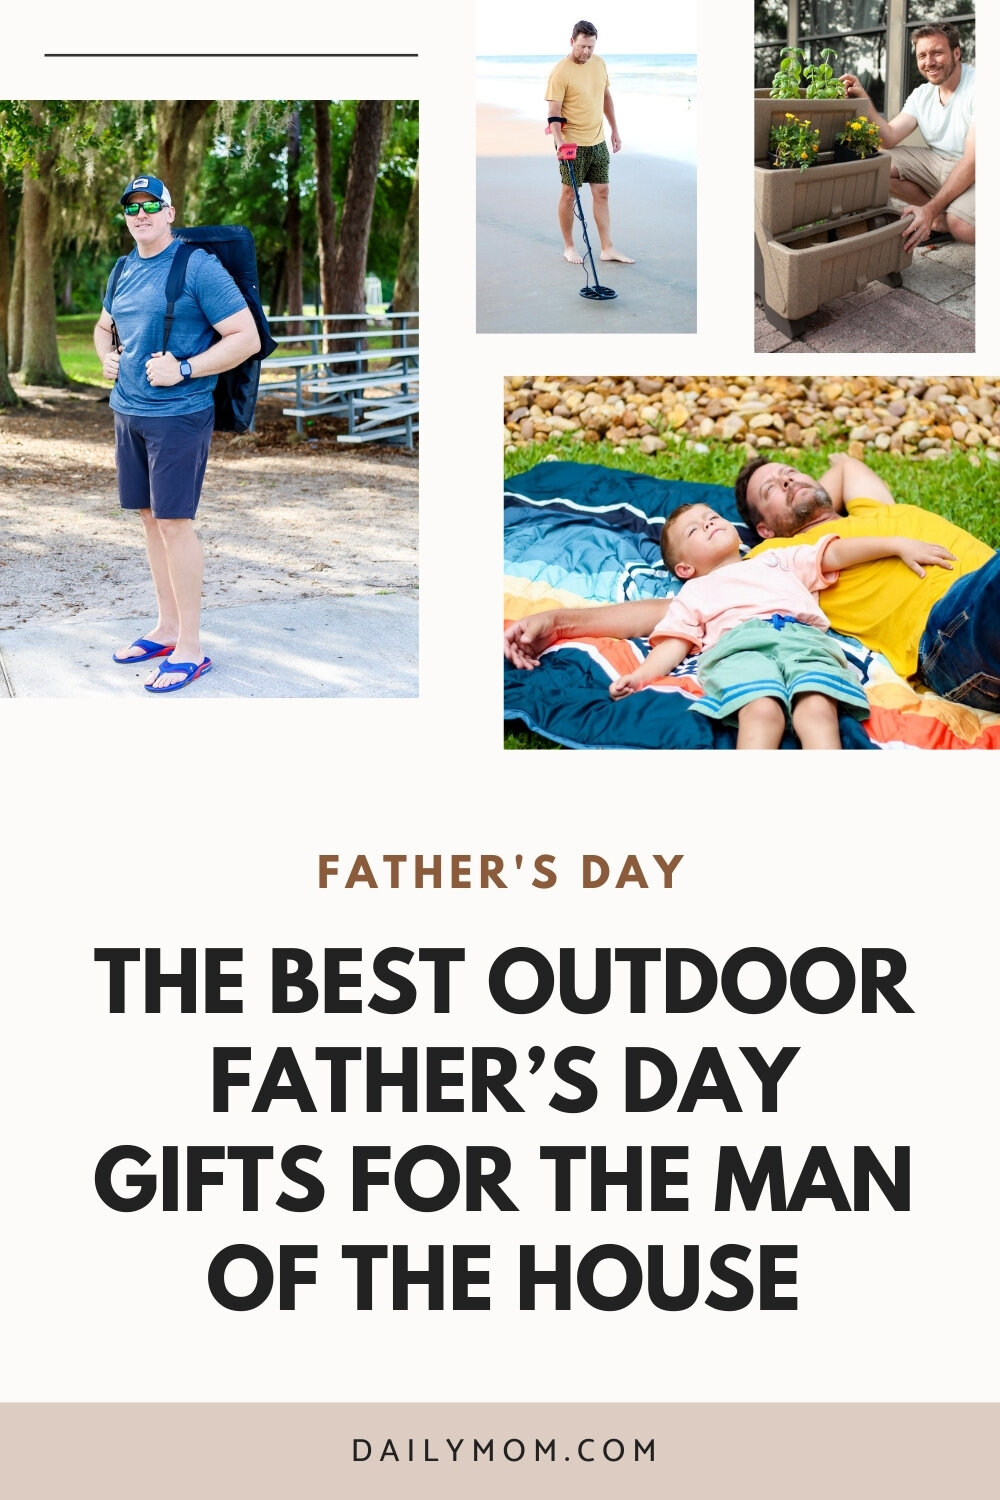 17 Of The Best Outdoor Father’S Day Gifts For The Man Of The House